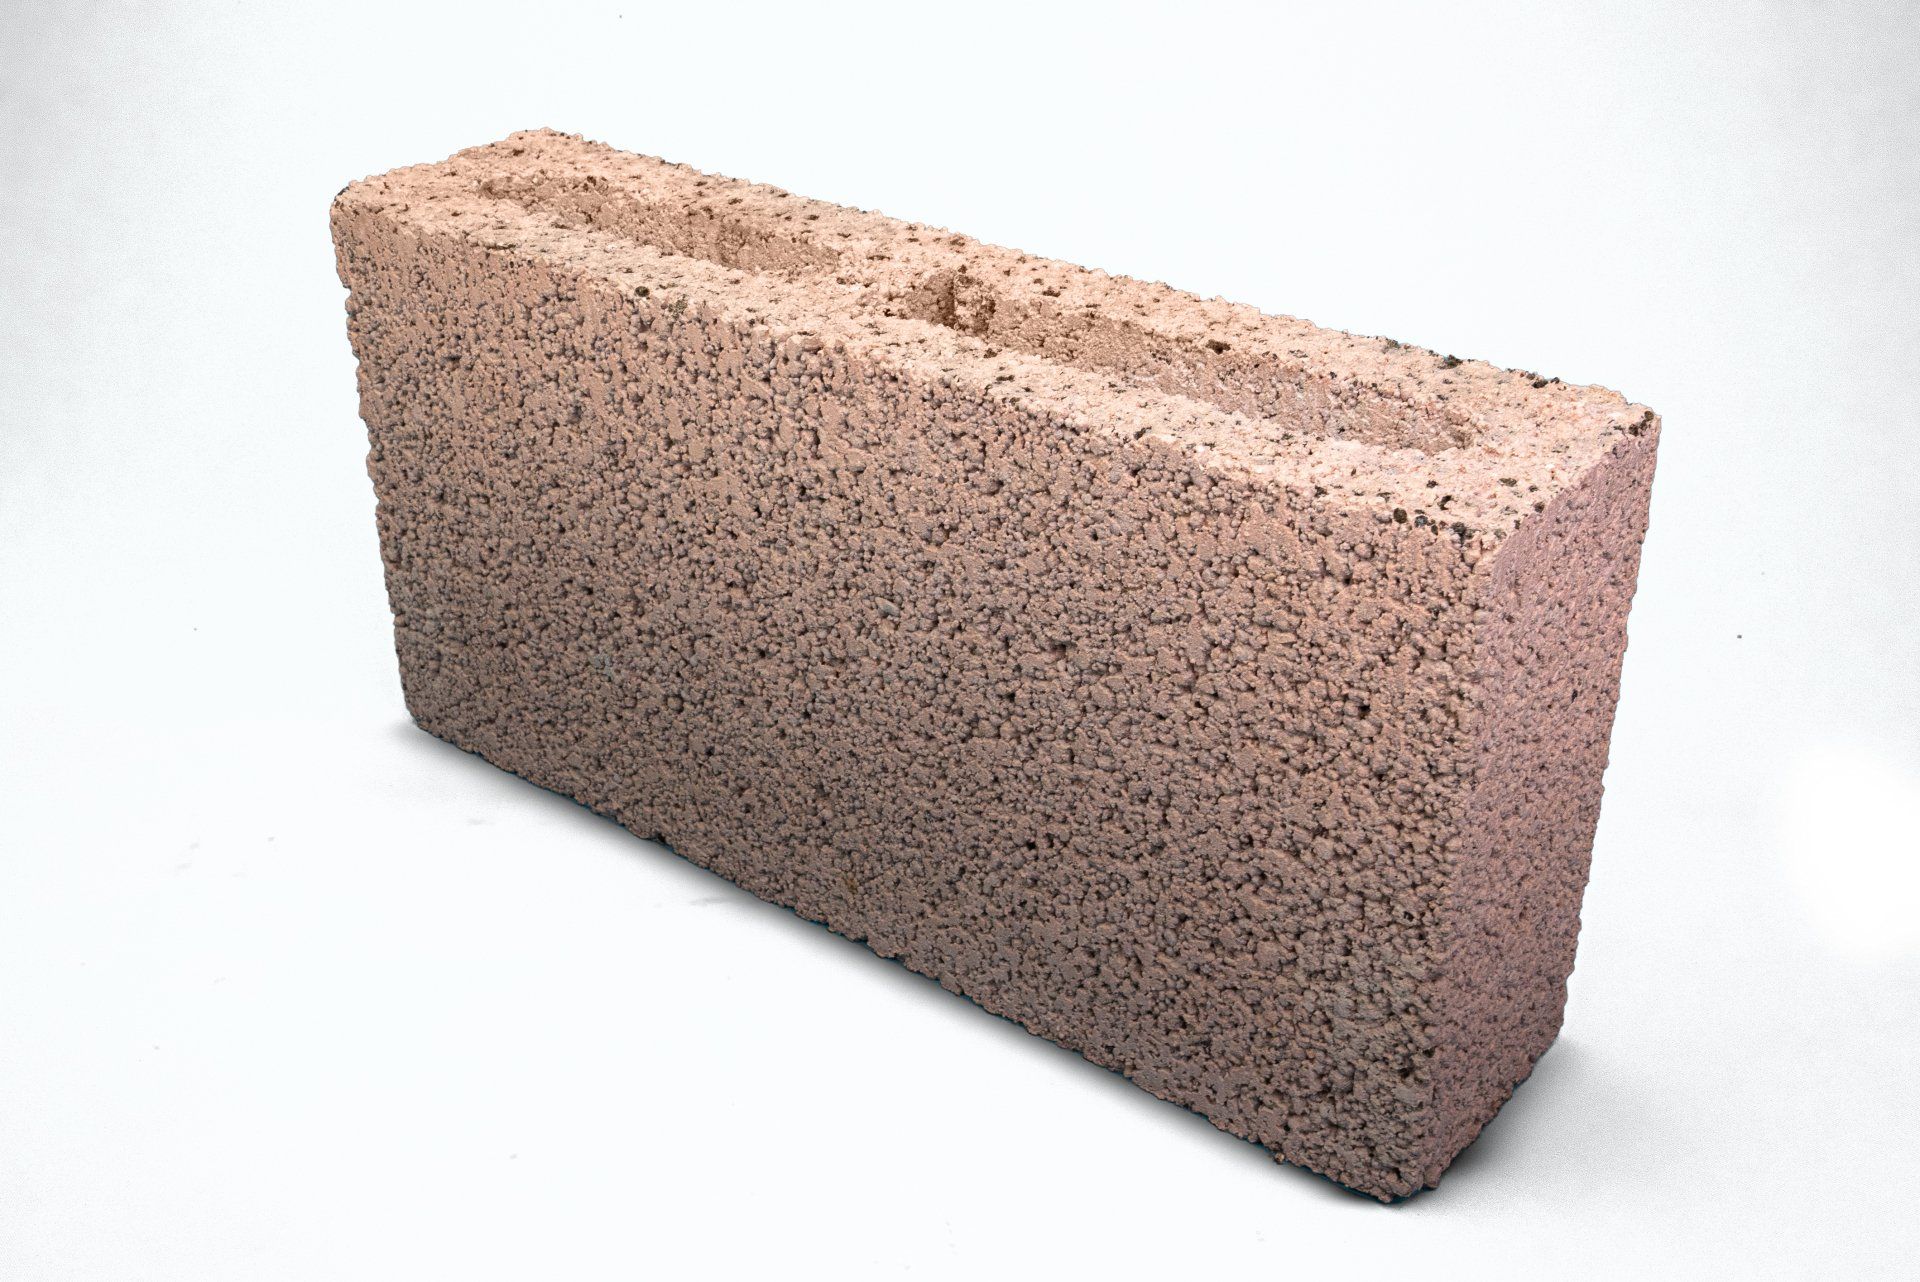 expanded clay brick